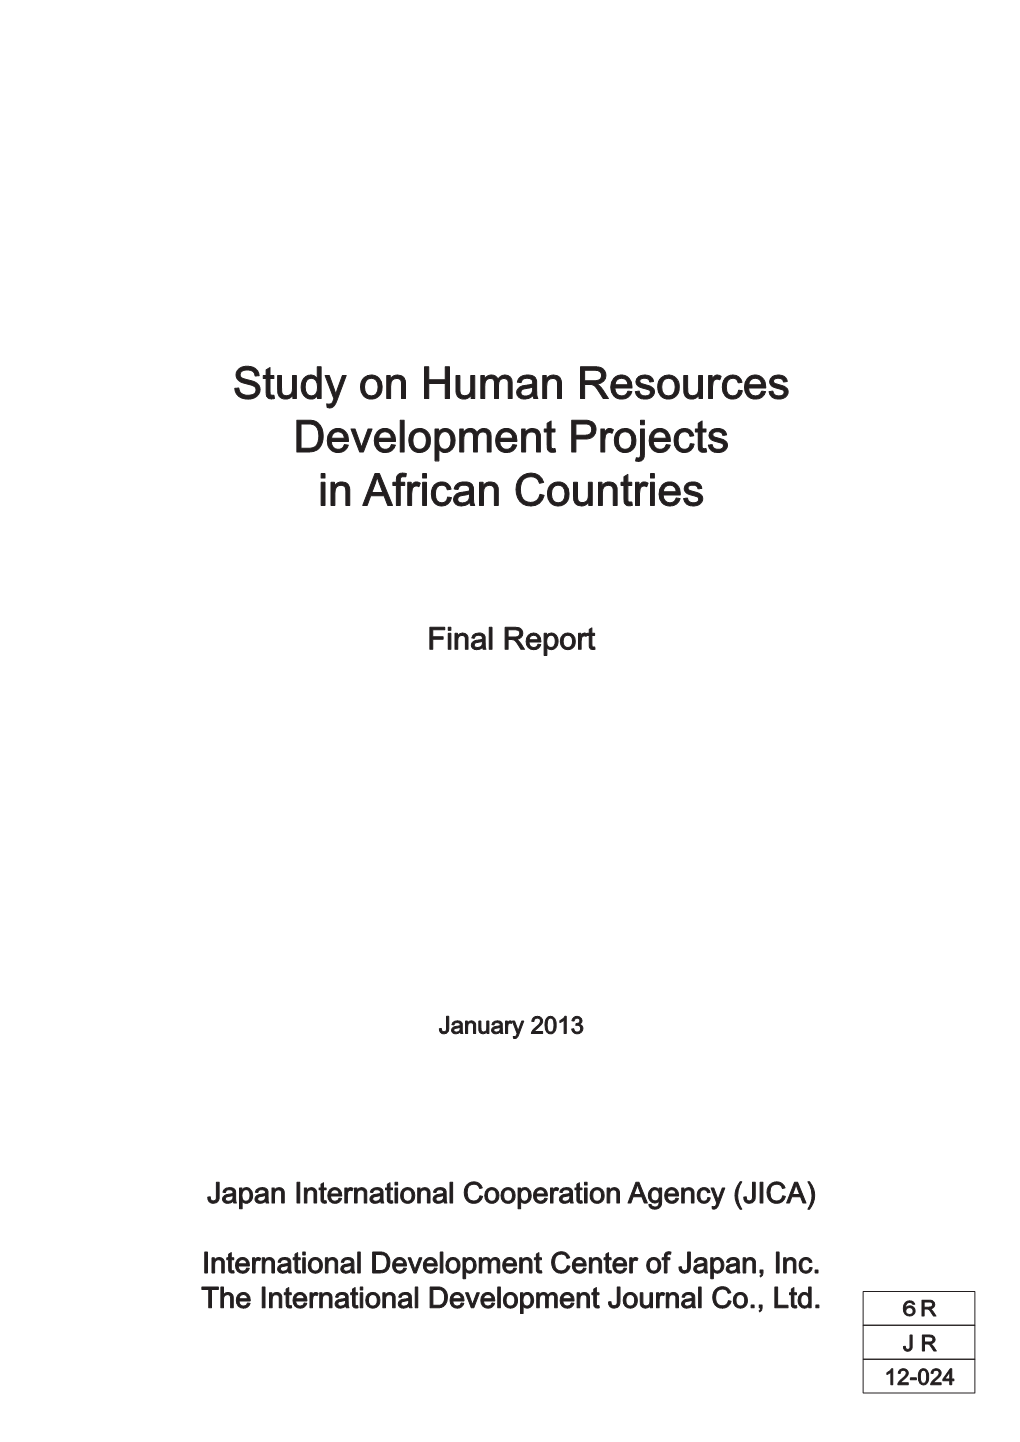 Study on Human Resources Development Projects in African Countries